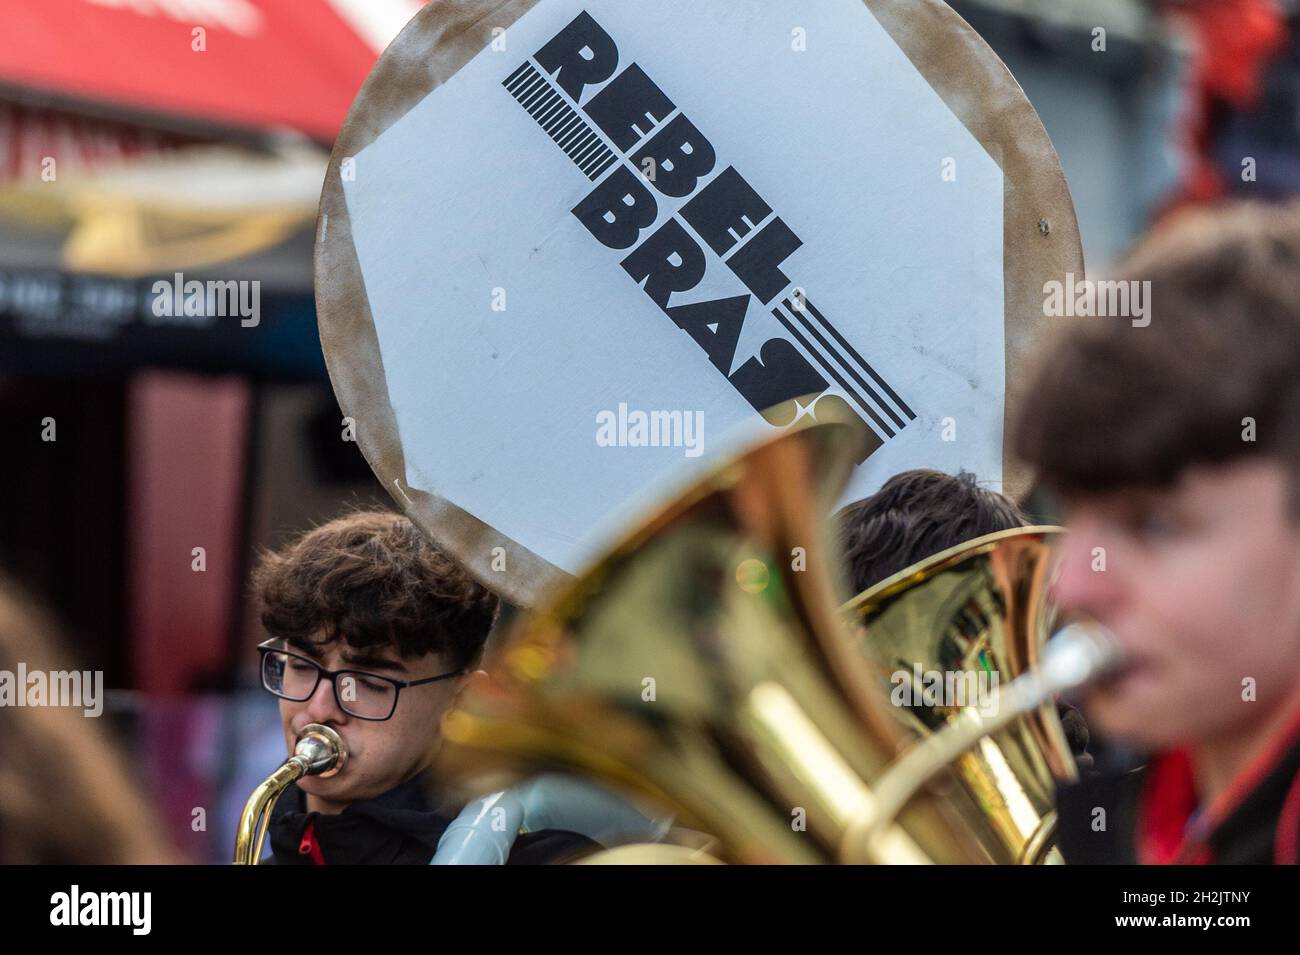 Cork, Ireland. 22nd Oct, 2021. The Cork Guinness Jazz Festival started today. The jazz festival takes place in and around Cork and runs until Monday 25th October. The 'Rebel Brass' band played on Oliver Plunkett Street. Credit: AG News/Alamy Live News Stock Photo